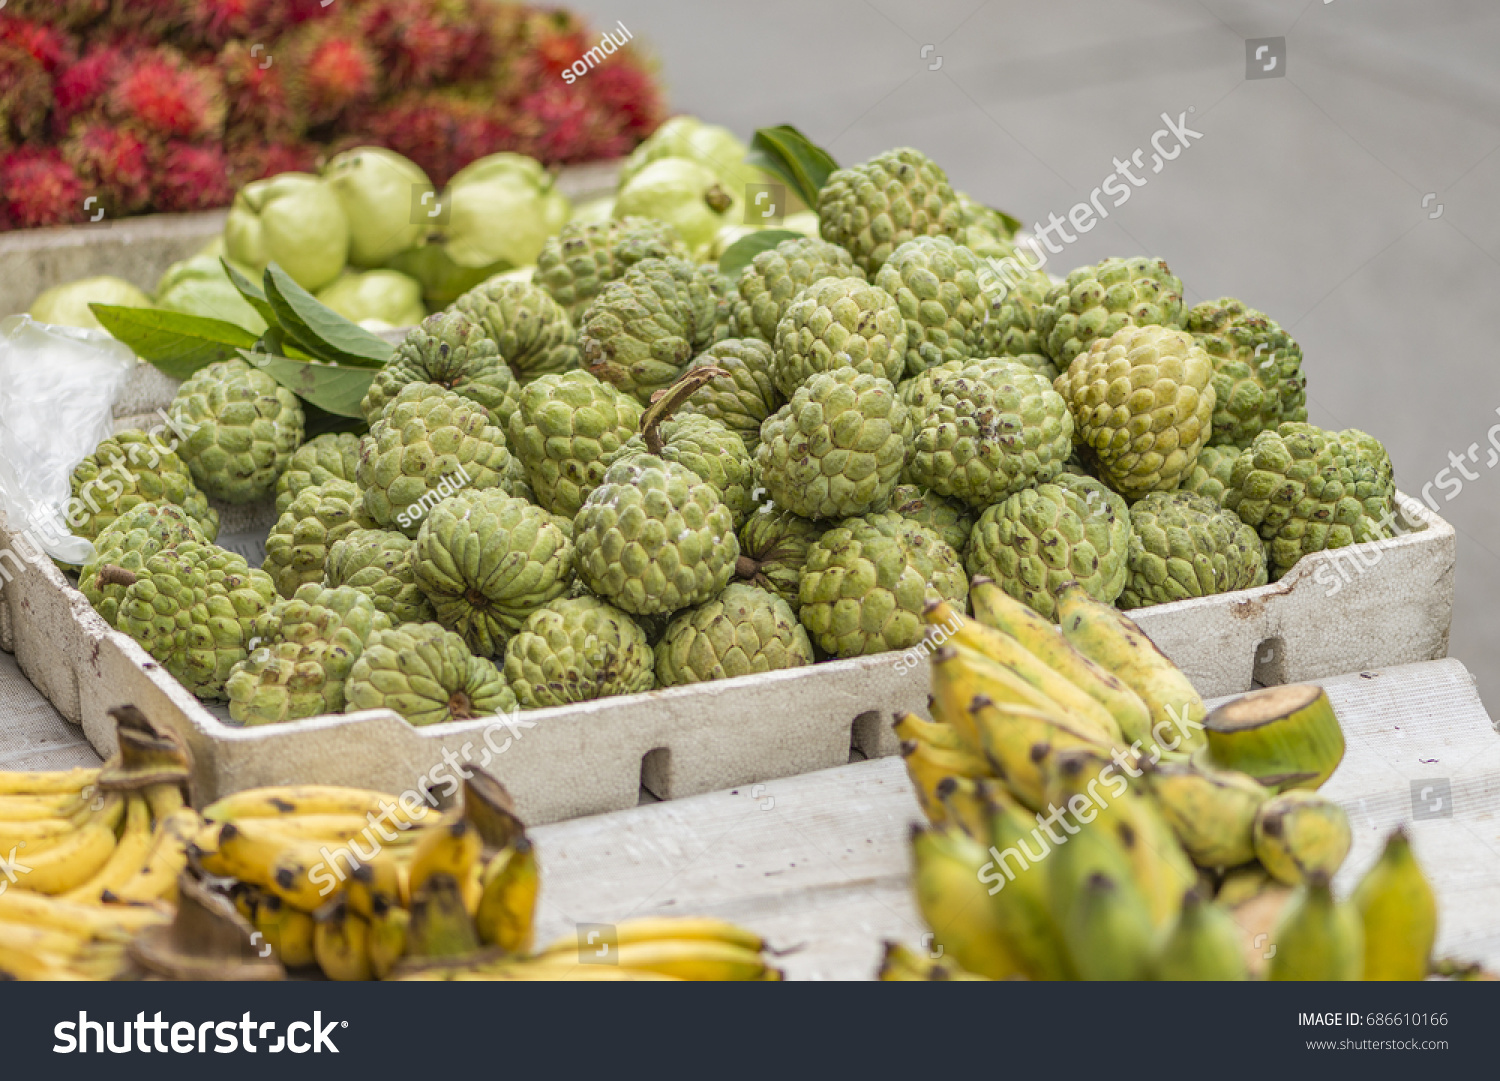 sugar apple many kind fruits sold stock photo (edit now) 686610166